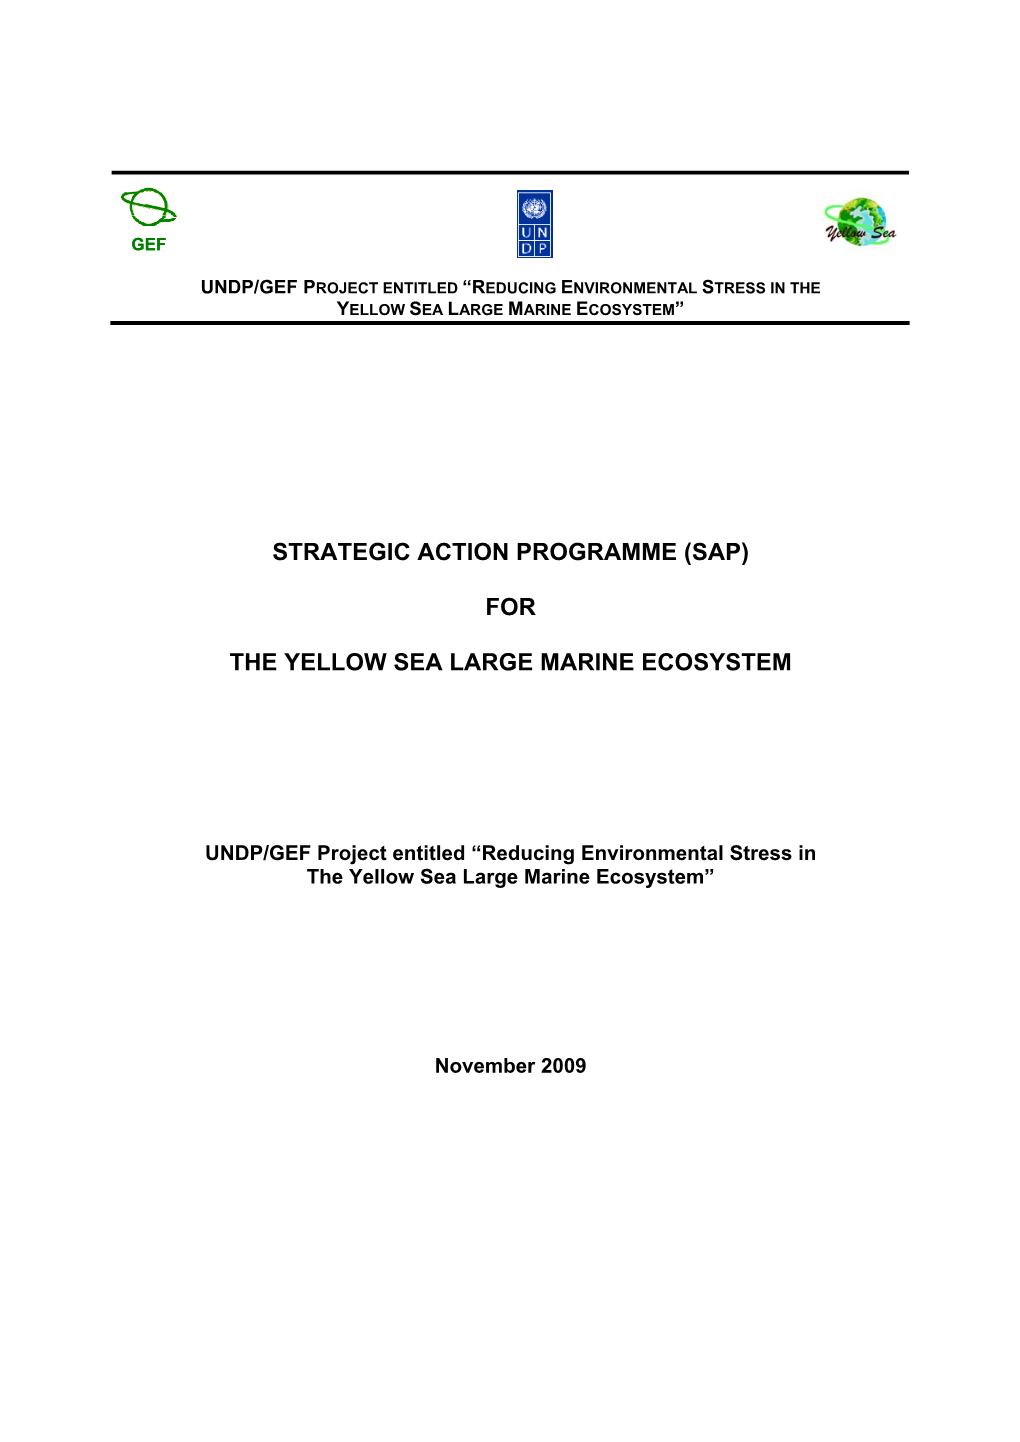 Strategic Action Programme (Sap) for the Yellow Sea Large Marine Ecosystem